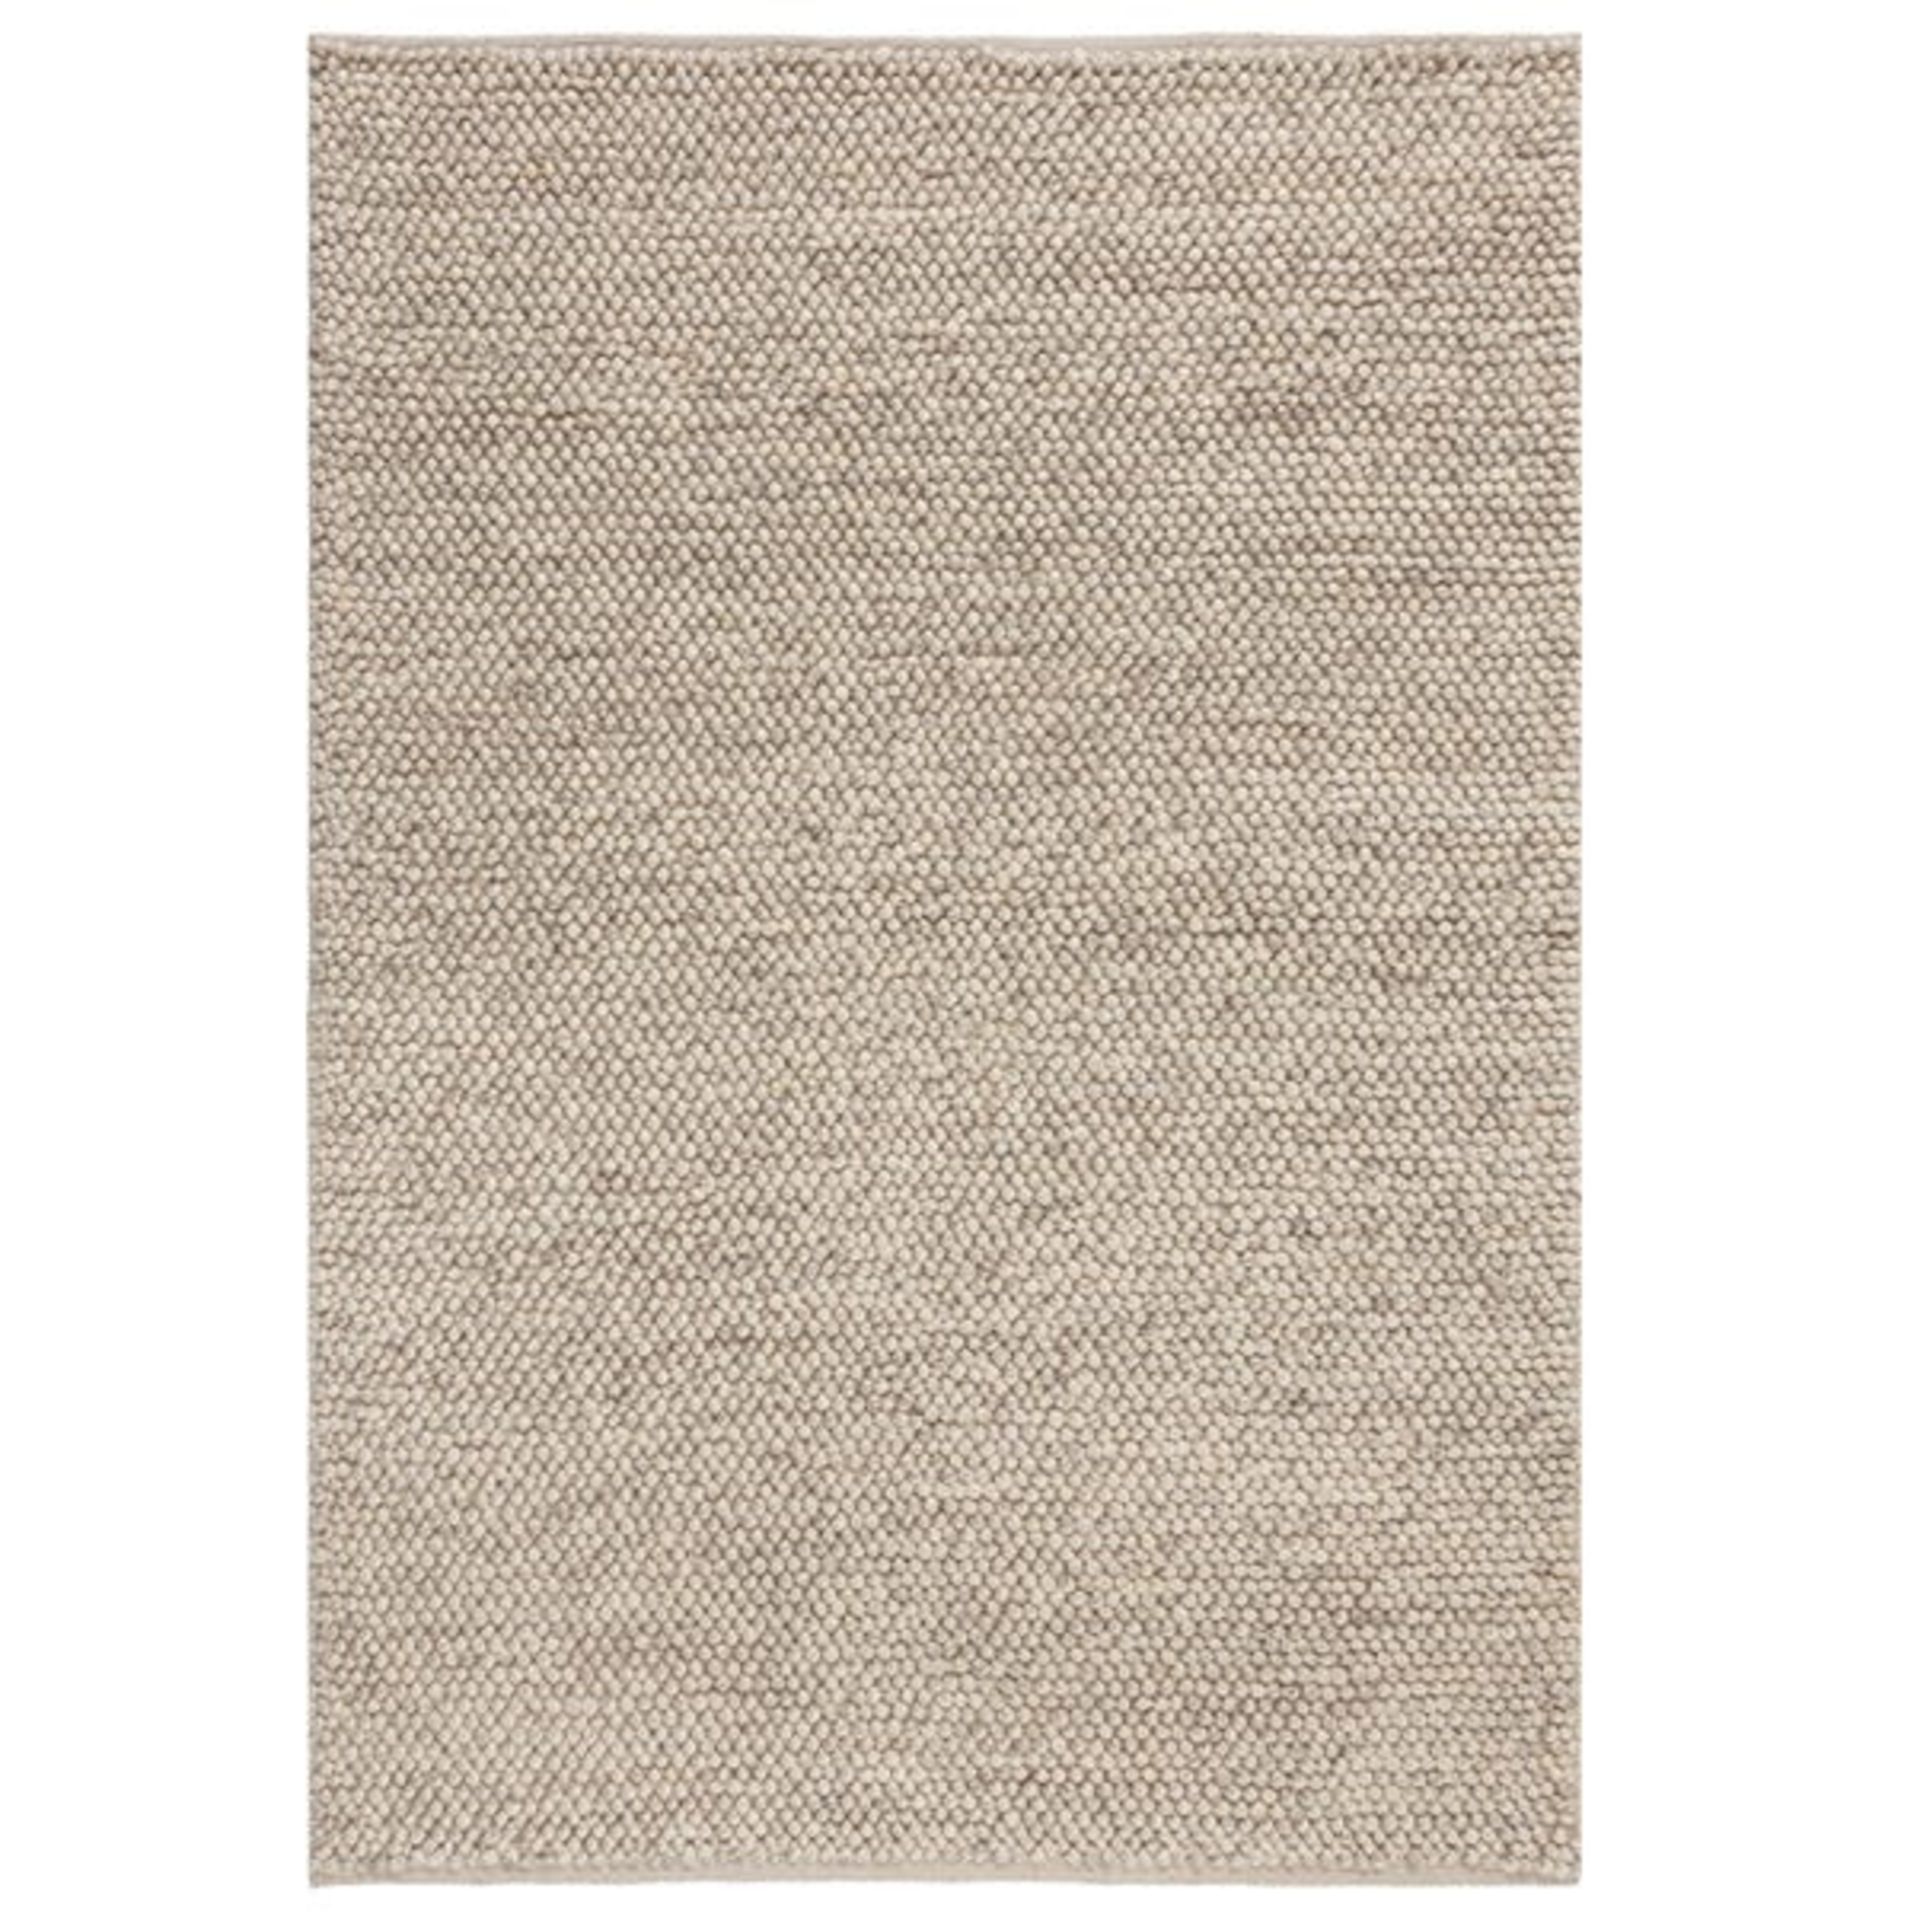 Minerals Rug Minerals Natural Rectangle 80X150cm RRP 99 About the Product(s) Minerals Rug Minerals